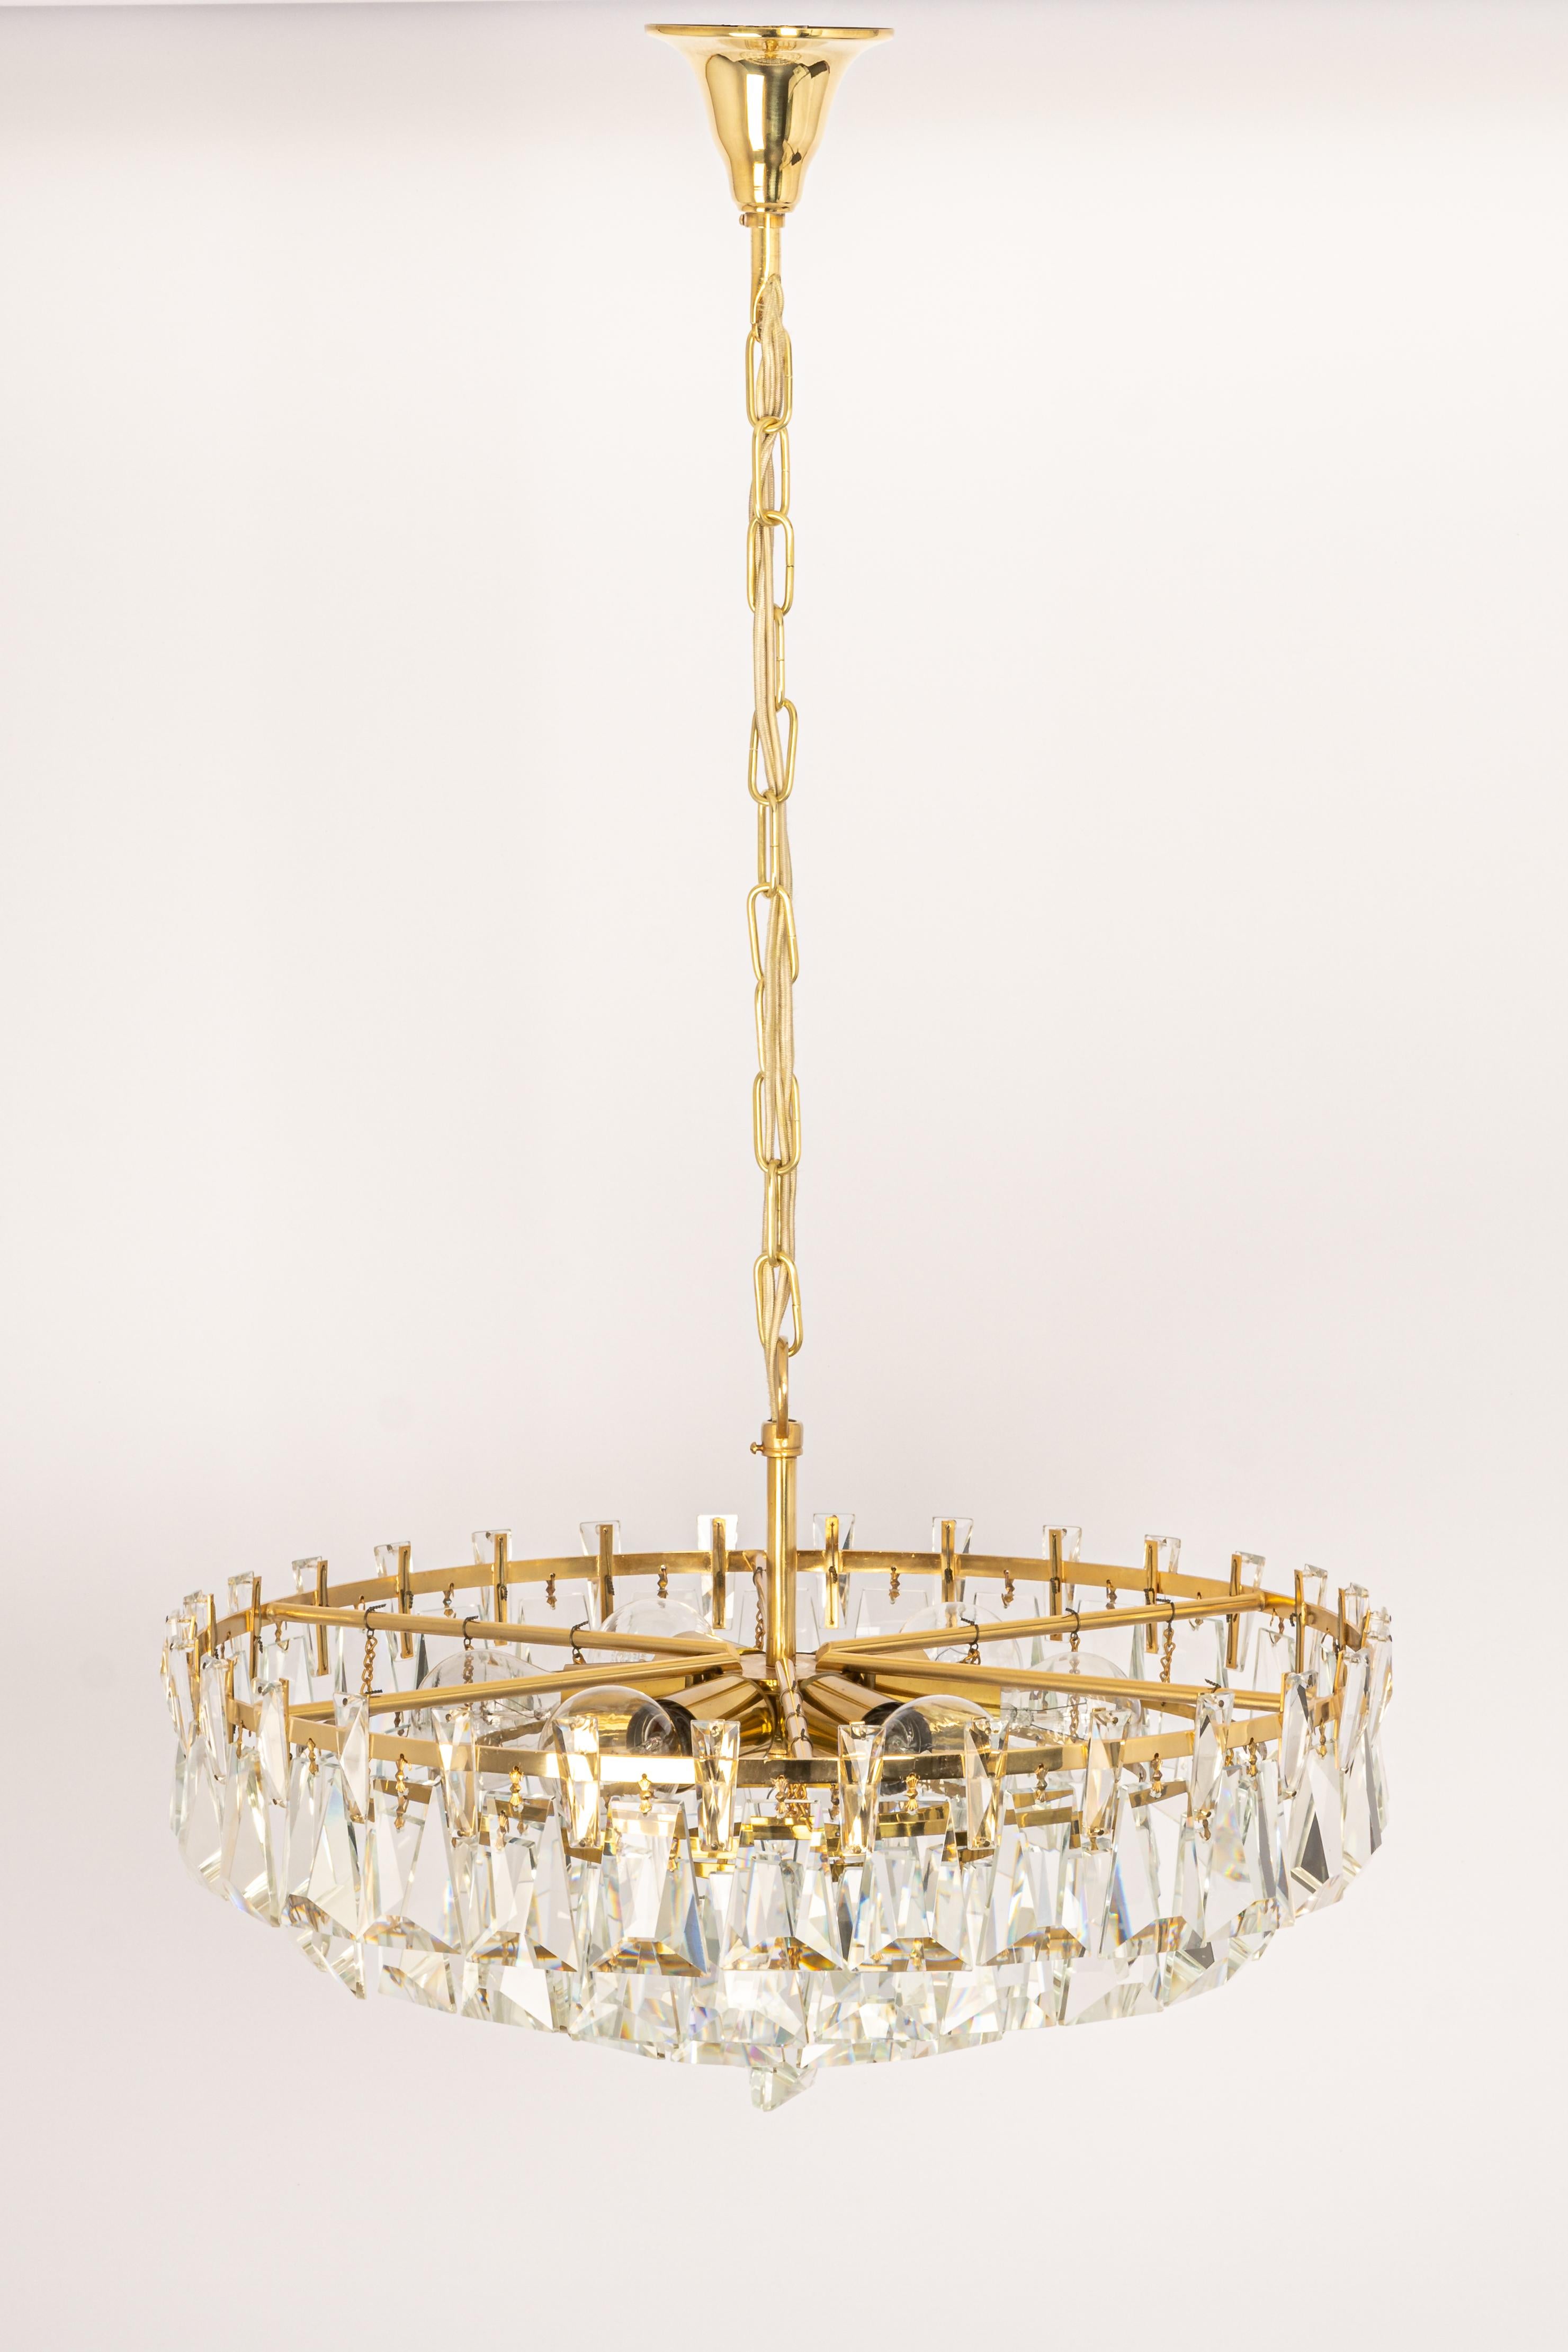 A wonderful and high-quality gilded chandelier or pendant light fixture by Palwa, Germany, 1970s.

It is made of a brass frame decorated with individual 